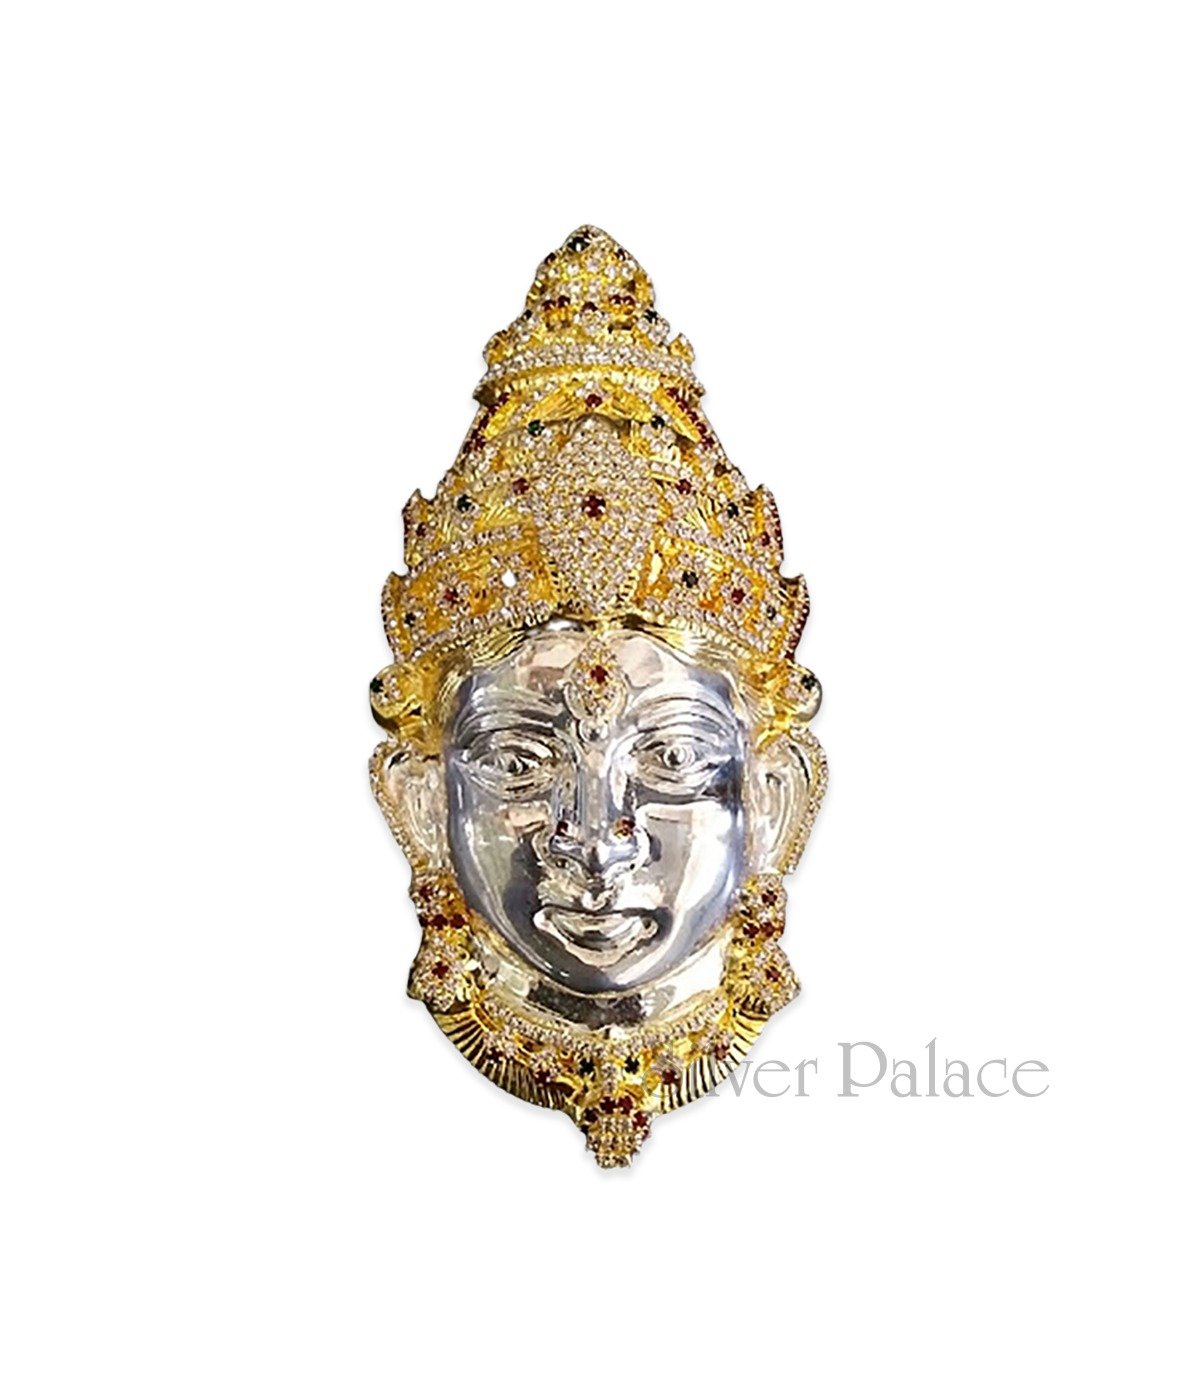 925 SILVER GOLD POLISHED AMMAN FACE WITH CUBIC ZIRCONNIUM STUDDED JEWELLERY